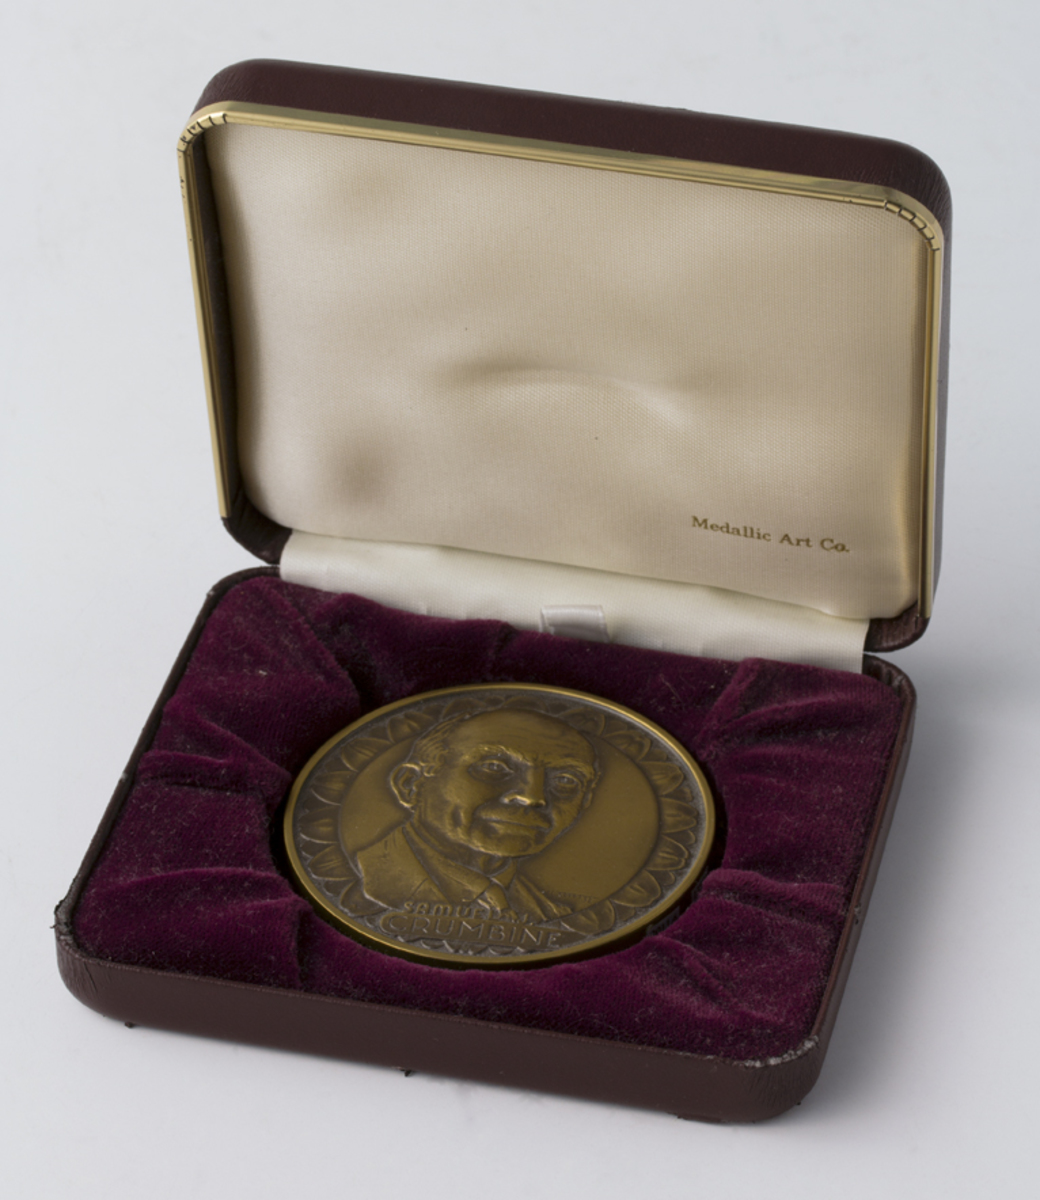 Round bronze medal with a portrait of a man (Dr. Samuel Crumbine) in a rectangular presentation box